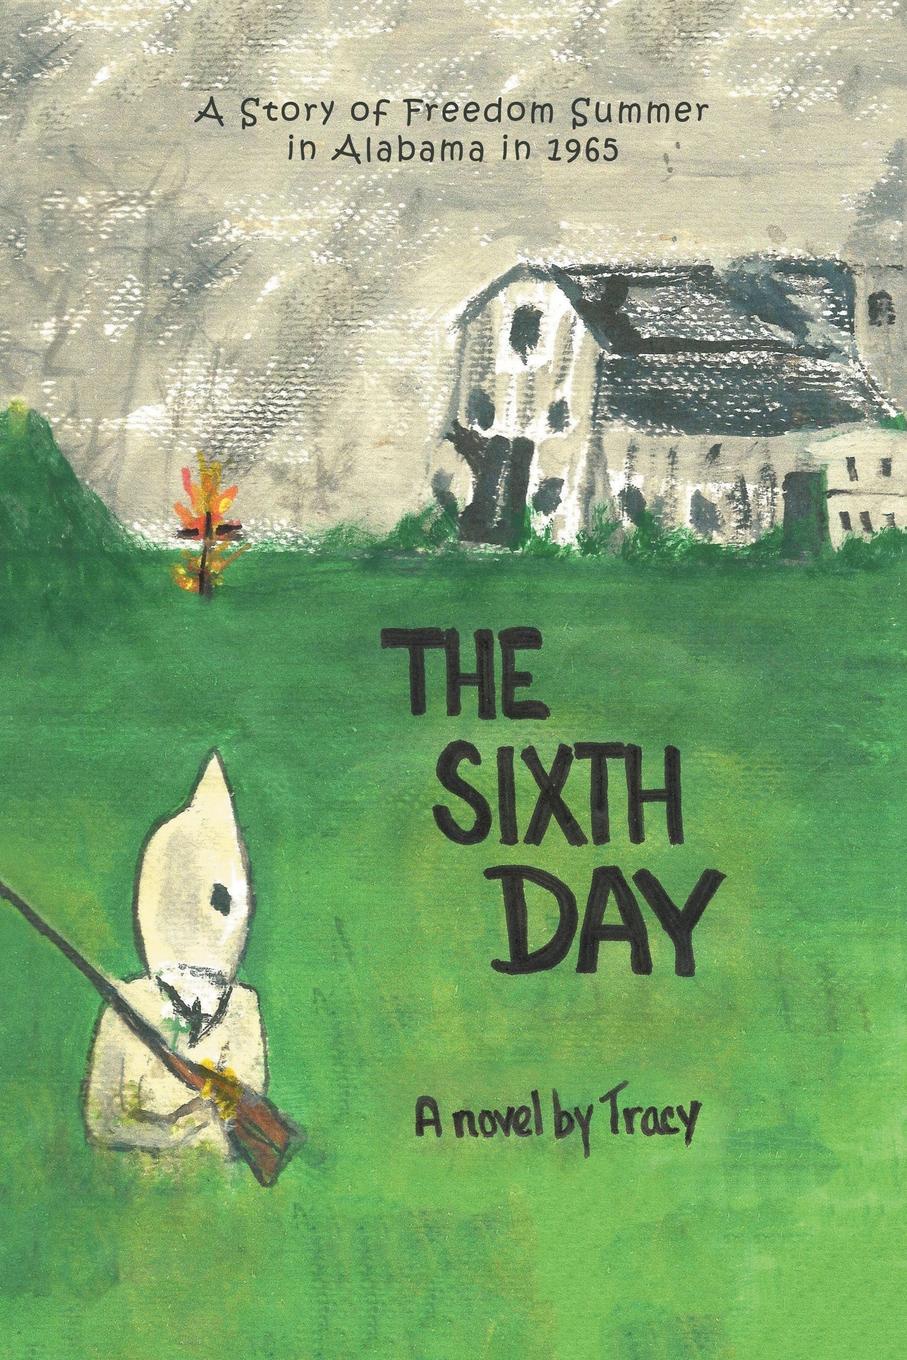 The Sixth Day. A Story of Freedom Summer in Alabama in 1965